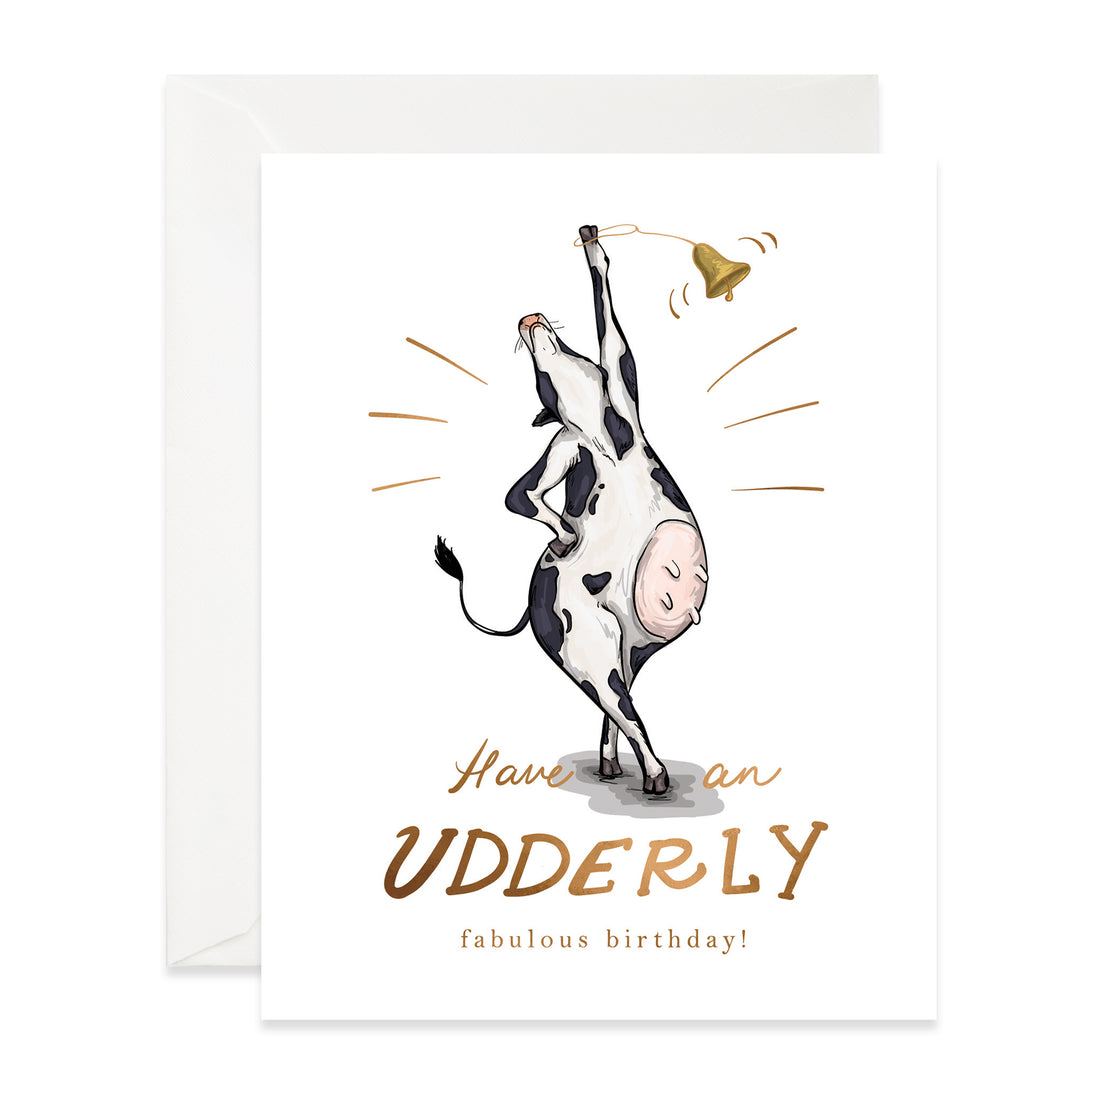 Udderly Fabulous Birthday Card crafted from premium paper, featuring a hand-illustrated cow dancing with the pun &quot;have an udderly fabulous birthday!&quot; by Good Juju Ink.